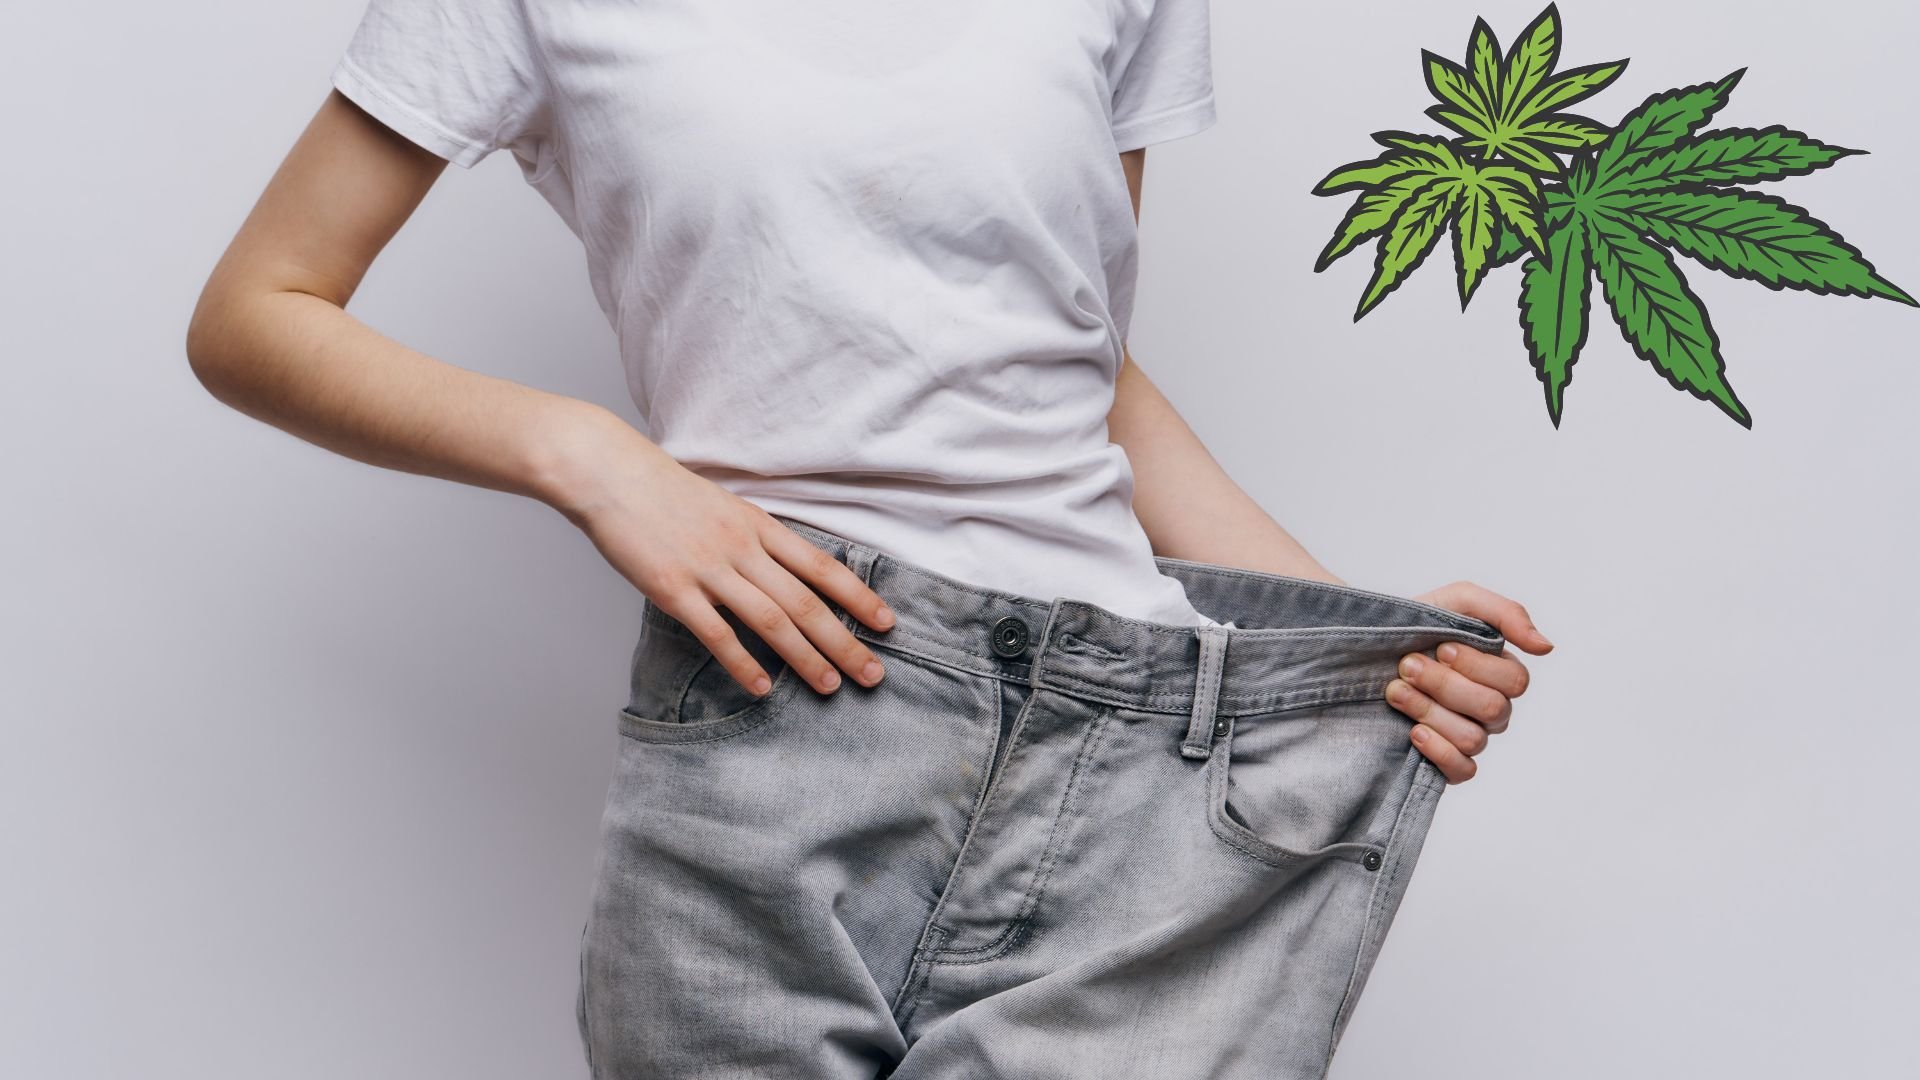 Do Edibles Make You Lose Weight?